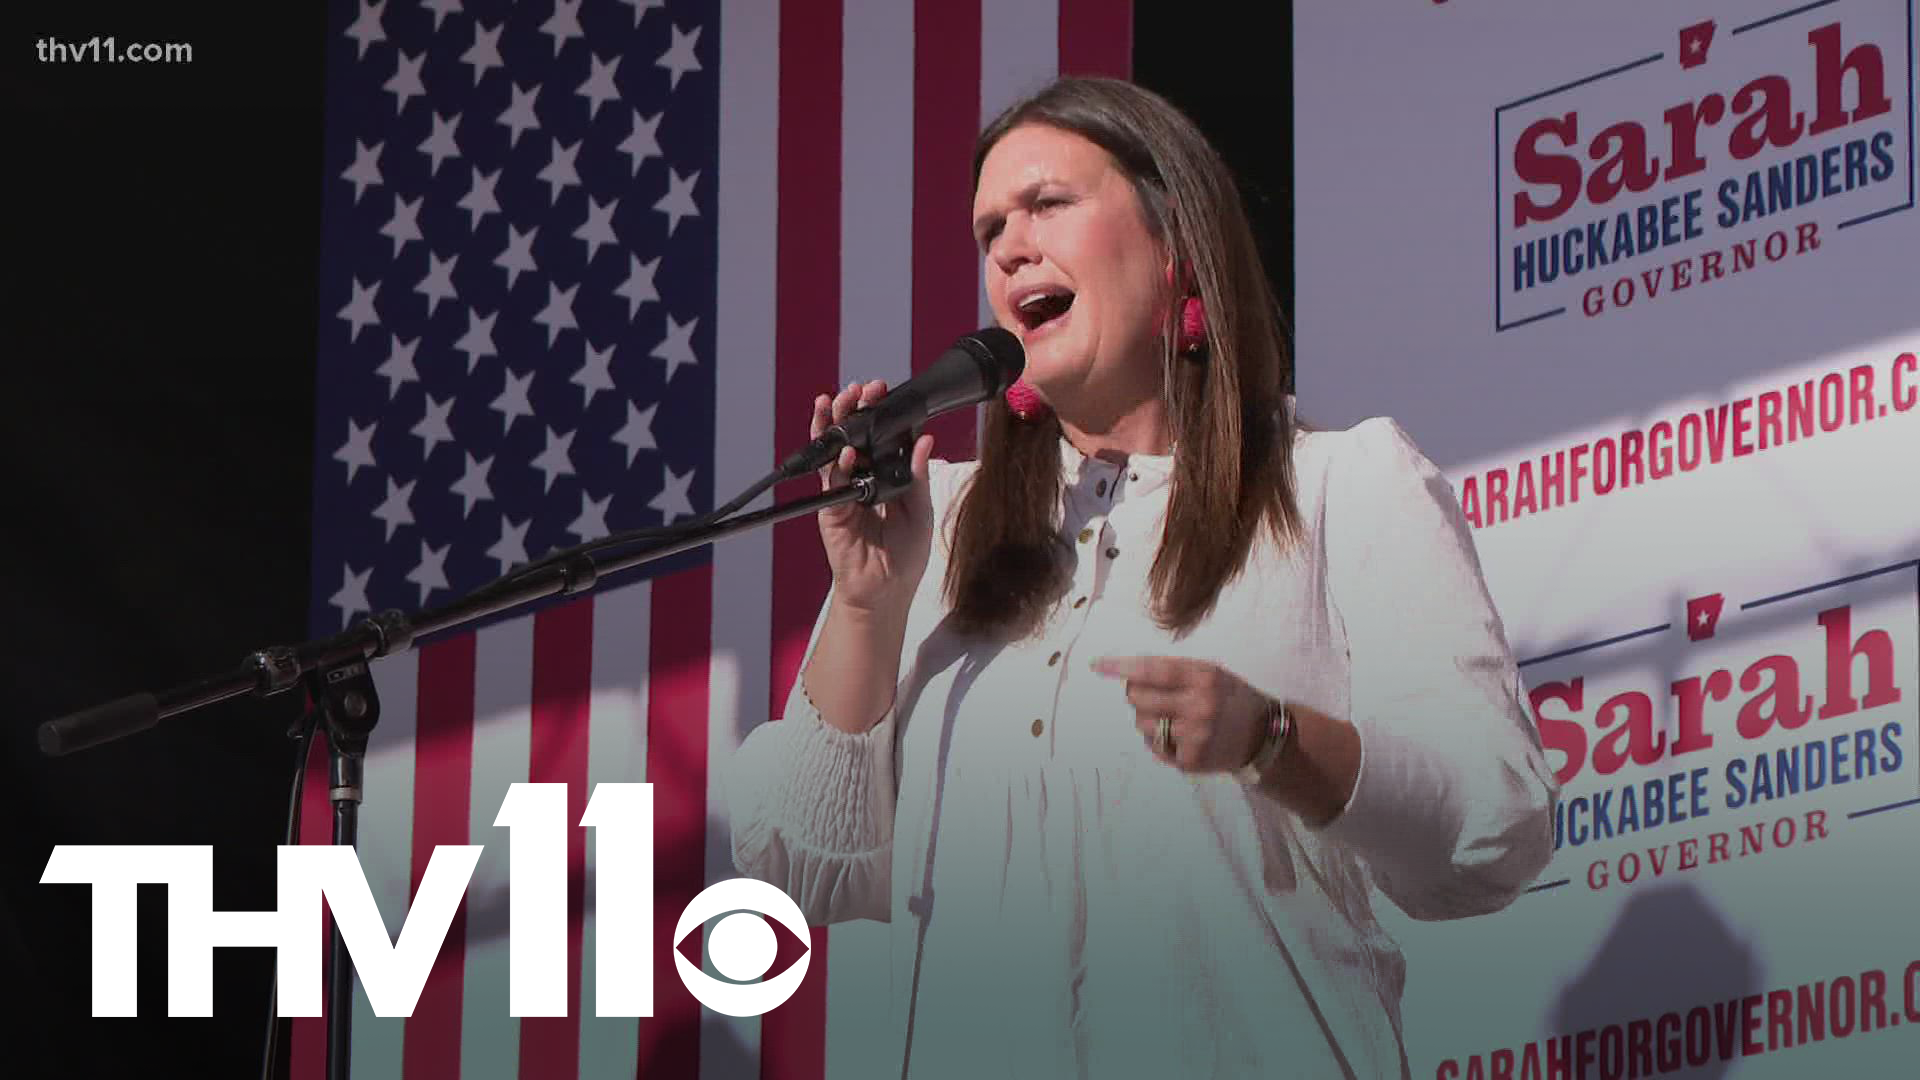 Sarah Huckabee Sanders formally kicked off her campaign for governor in the natural state.